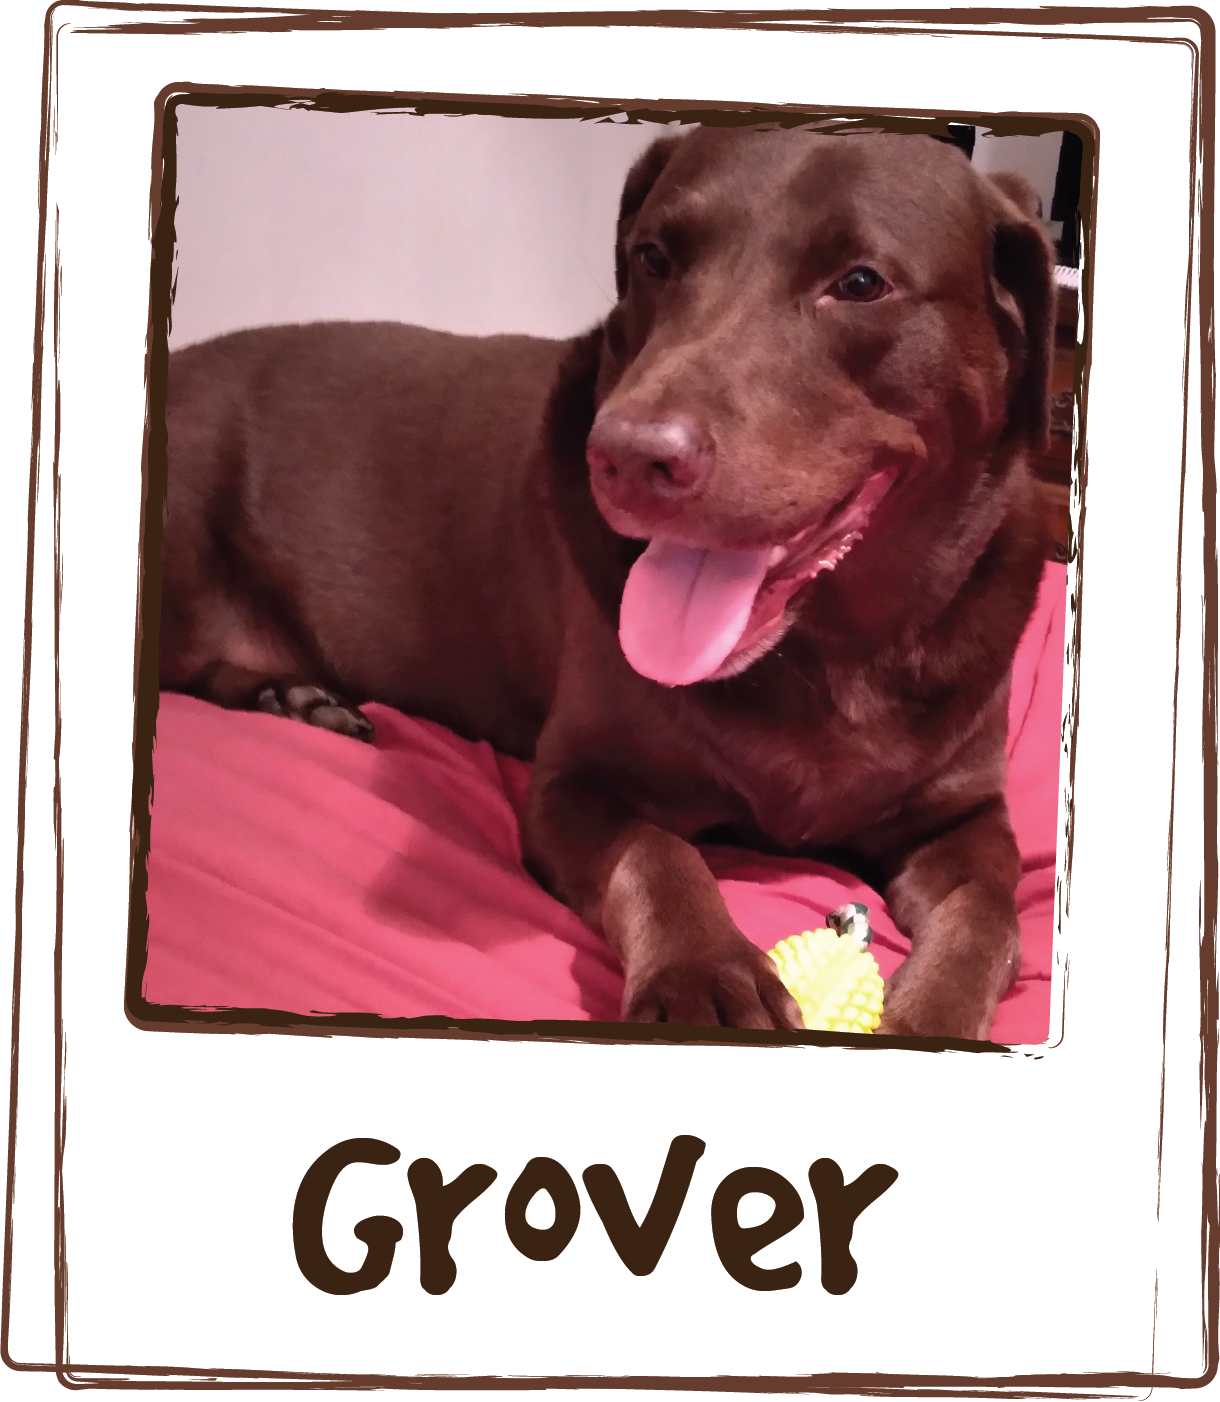  “Grover has hip pain and he feels so much better and sleeps well when I give him the pain relief packet. It makes me happy to see my boy feeling better and playing. Thanks Licks!” 